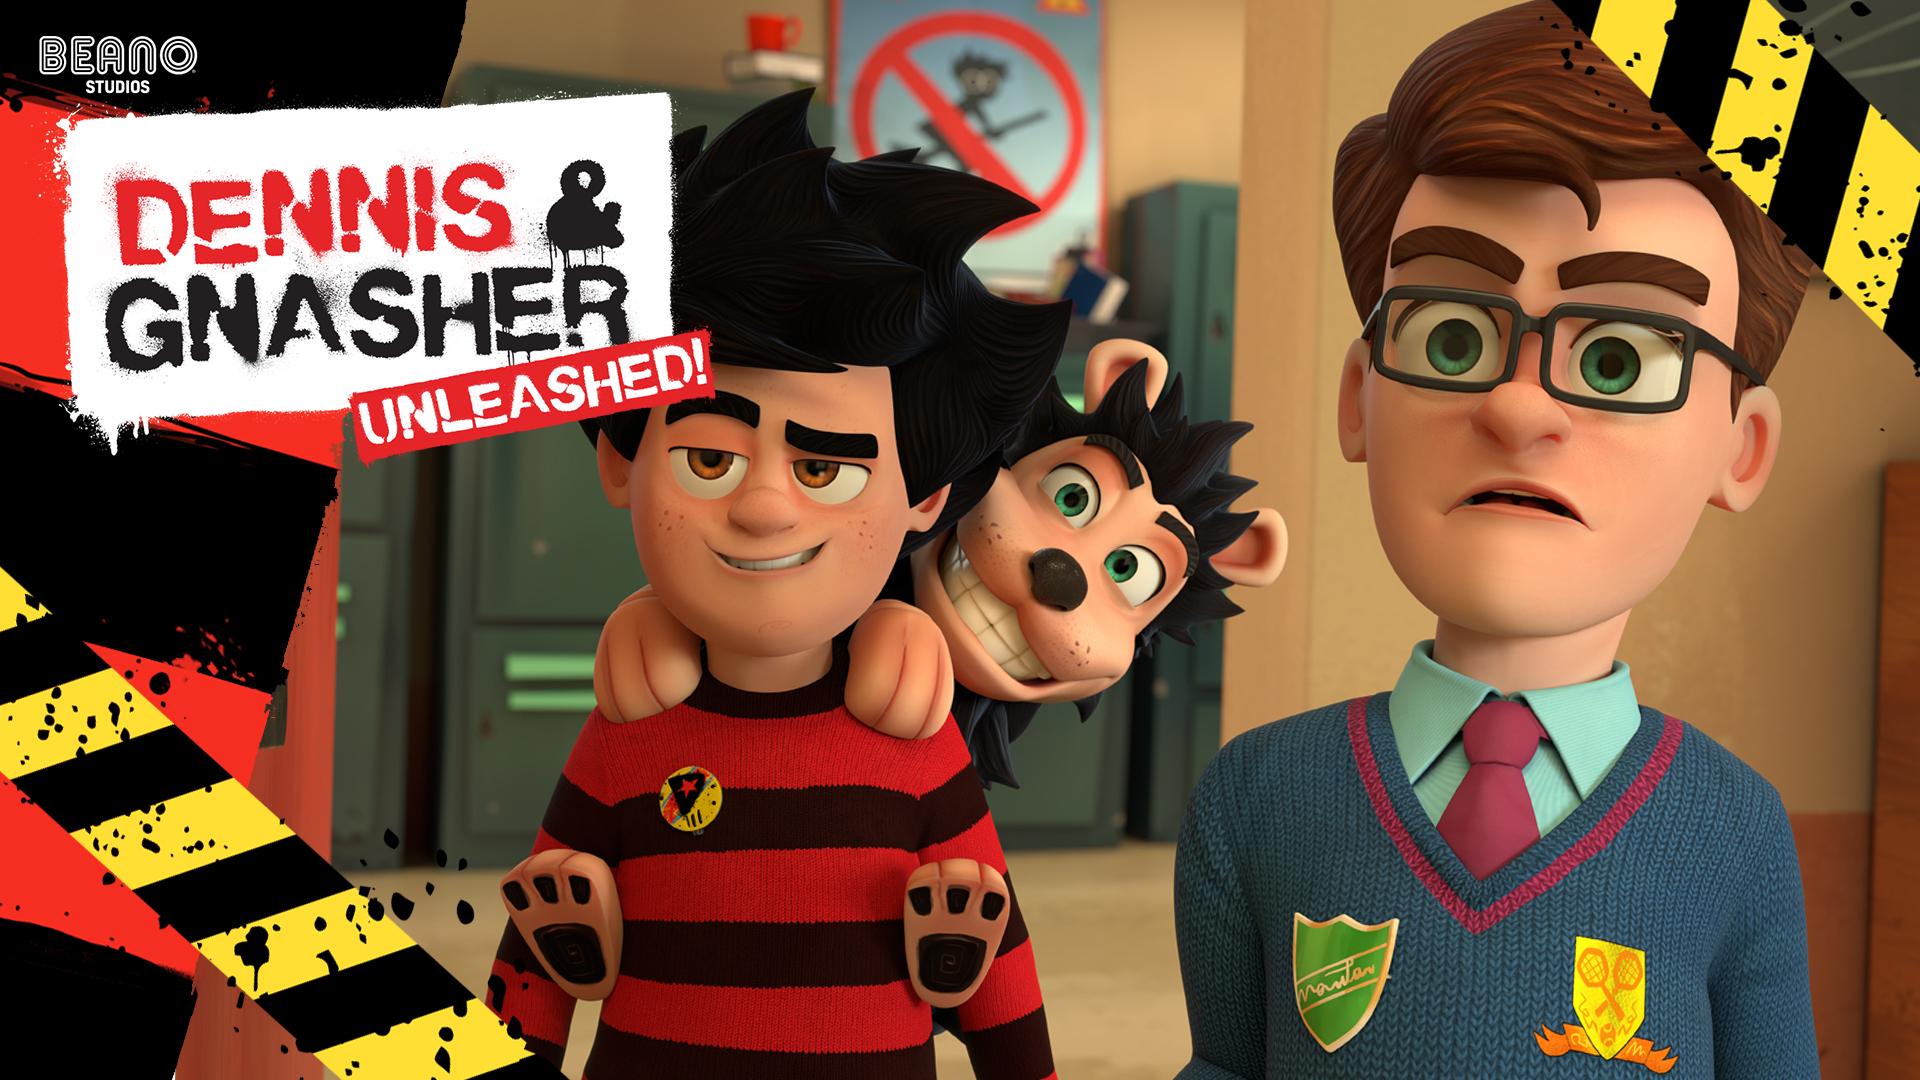 Dennis & Gnasher Unleashed! Series 2 - Episode 11: We Want To Break Free